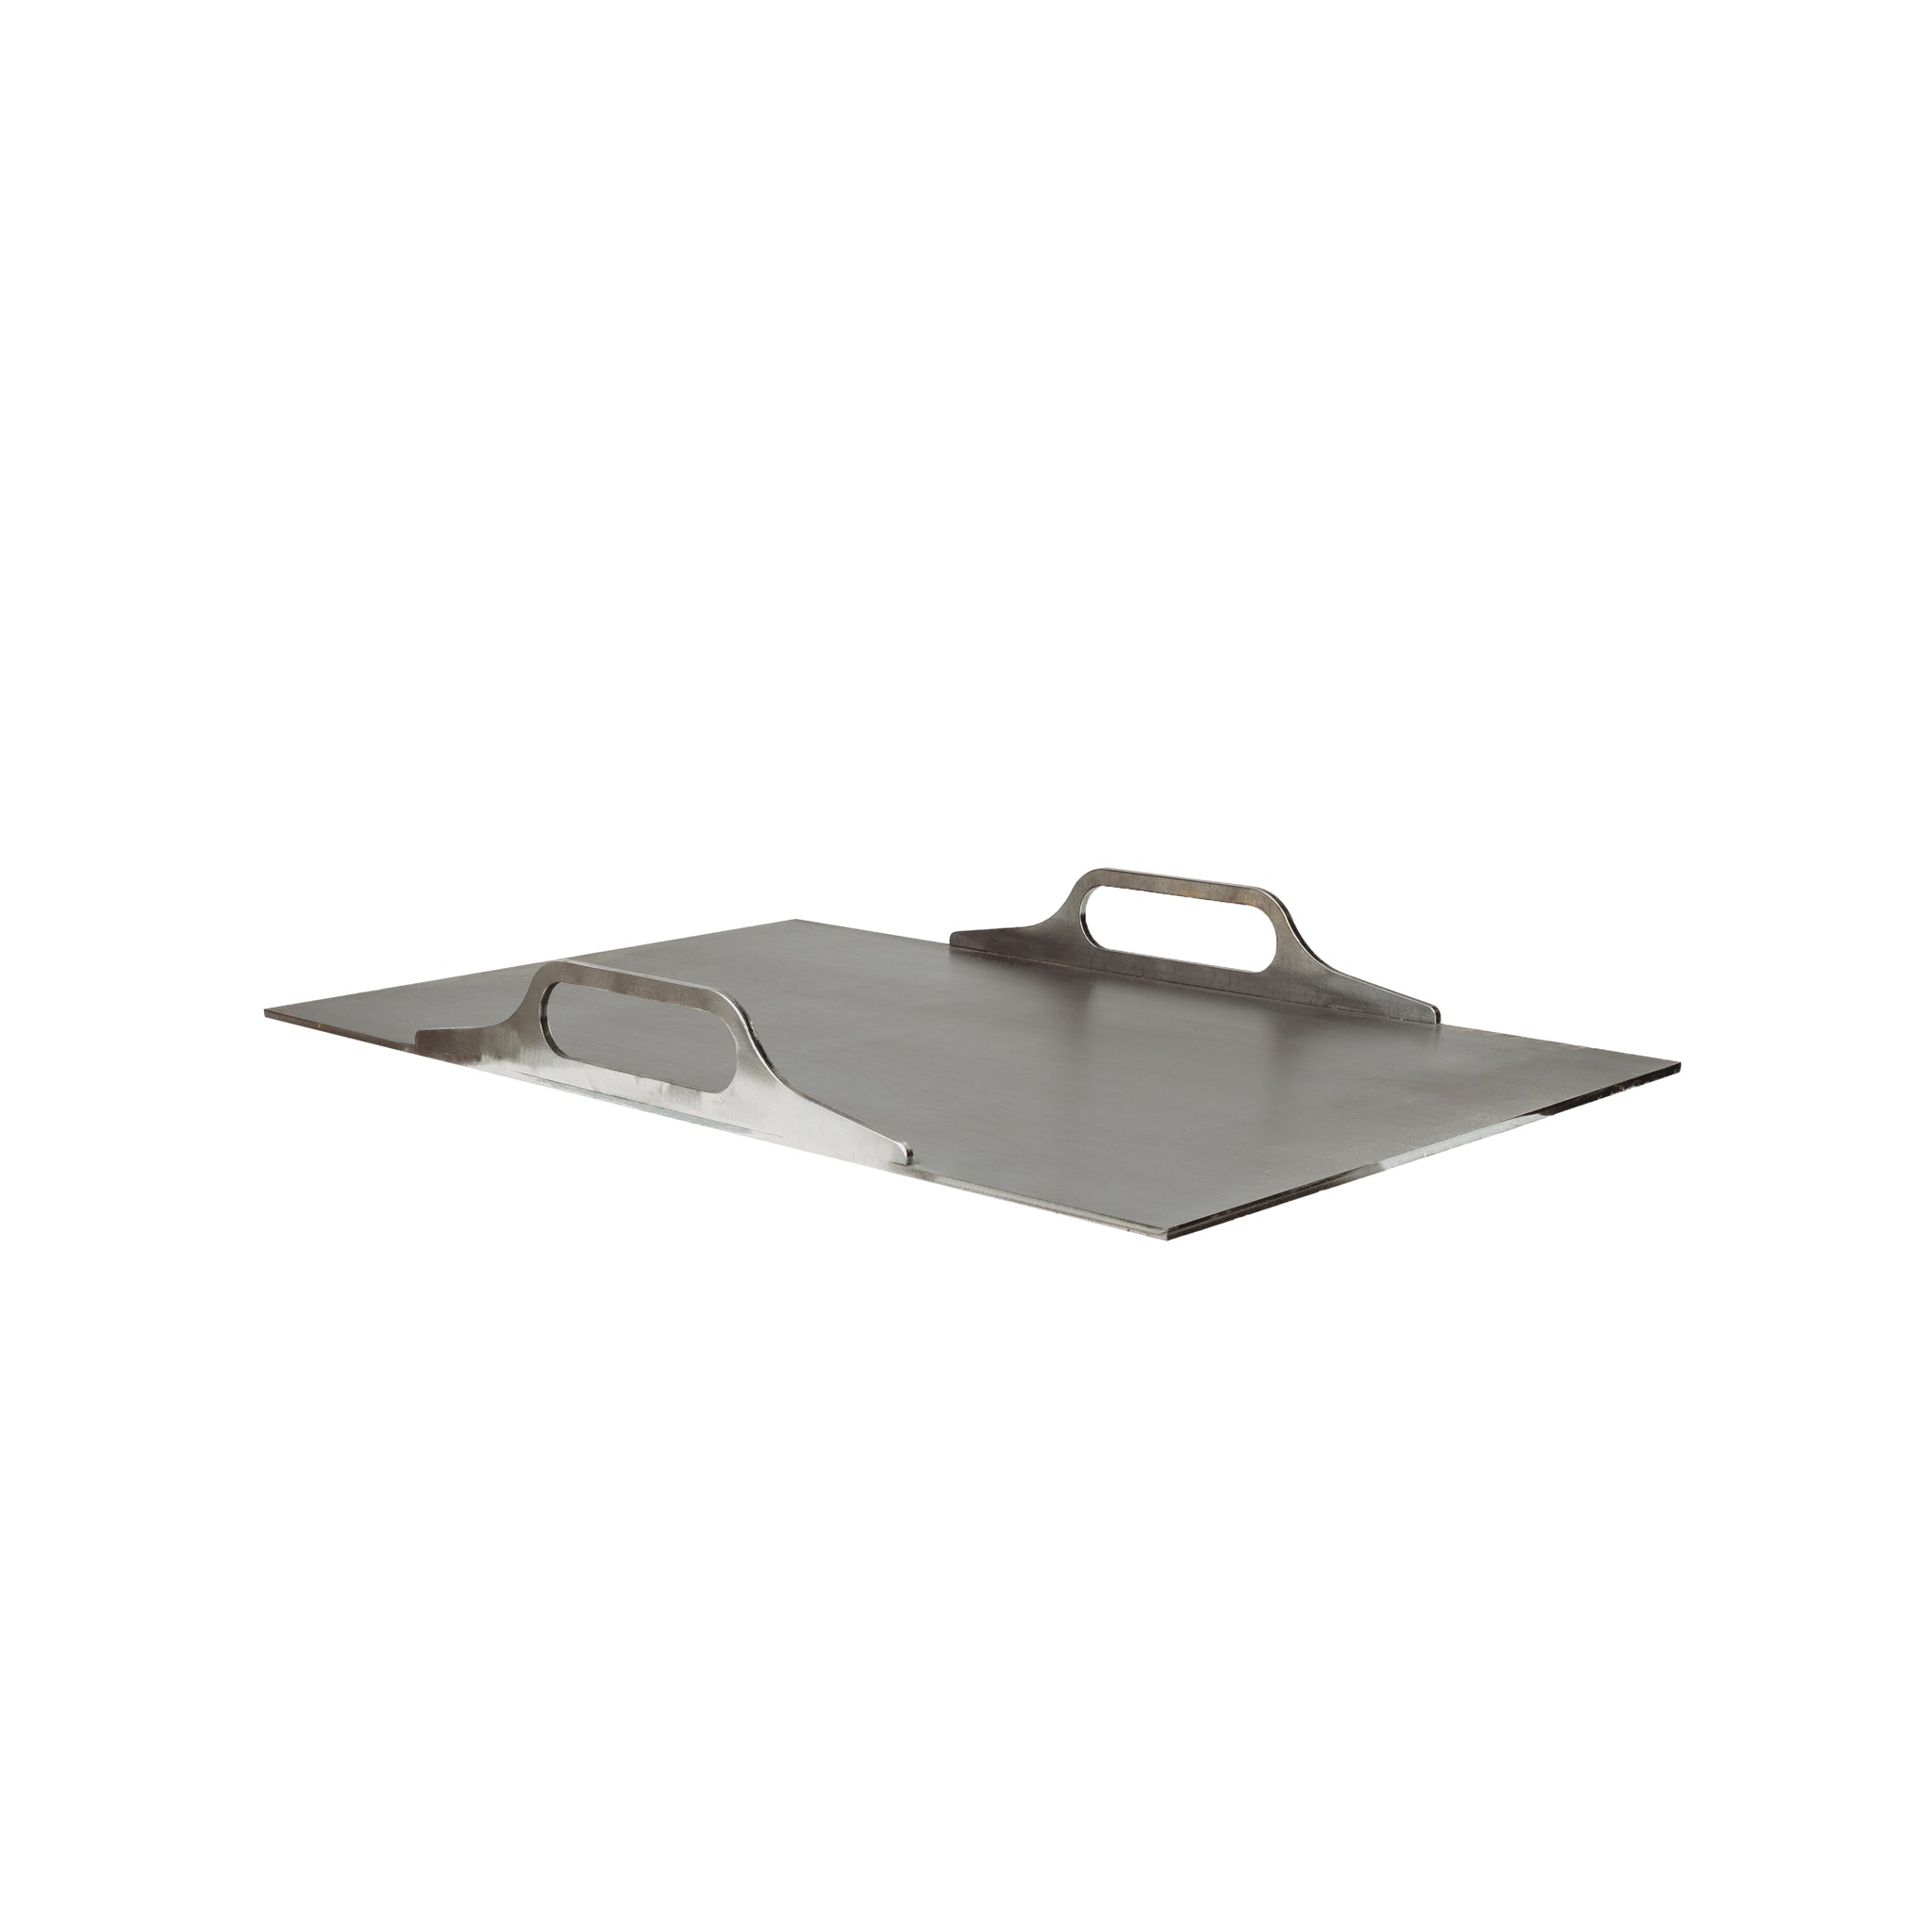 GrillSymbol Flat Top Griddle XXL 38 x 61 cm 
(suitable for Chef XXL Charcoal BBQ models)